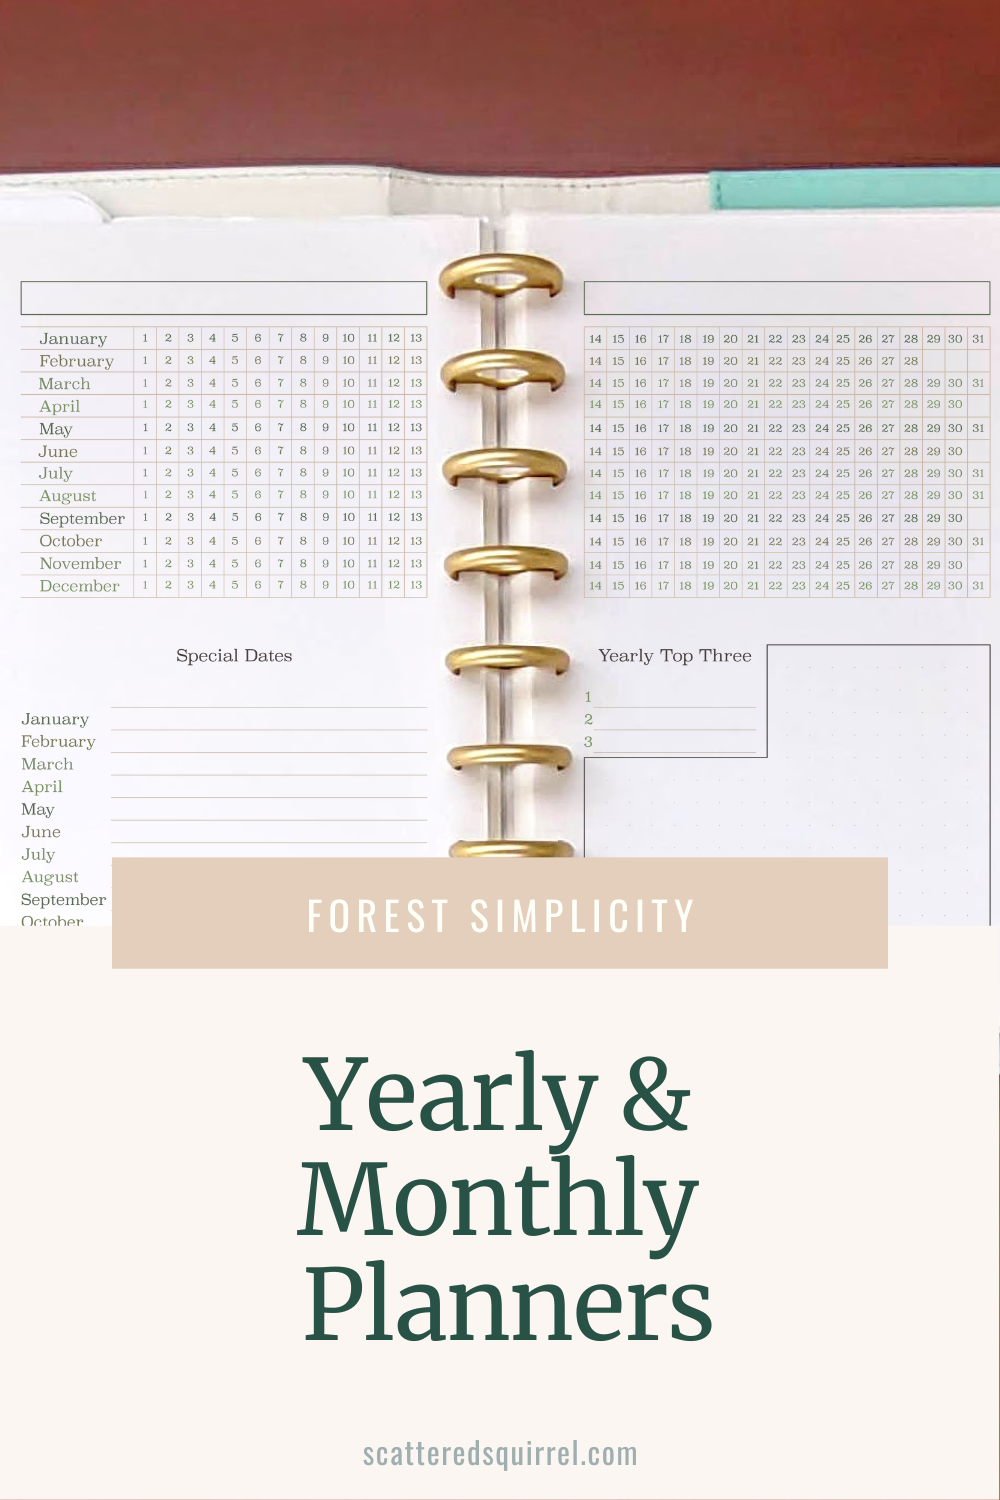 Image shows a white and teal planner lying open on a wooden desk. The planner is bound with gold coloured disc. On the pages you can see a dated grid with the month going down the left hand side. Beneath there is a space for special dates and prioritizing your yearly tasks. The text reads "Forest Simplicity - Yearly and Monthly Planners."